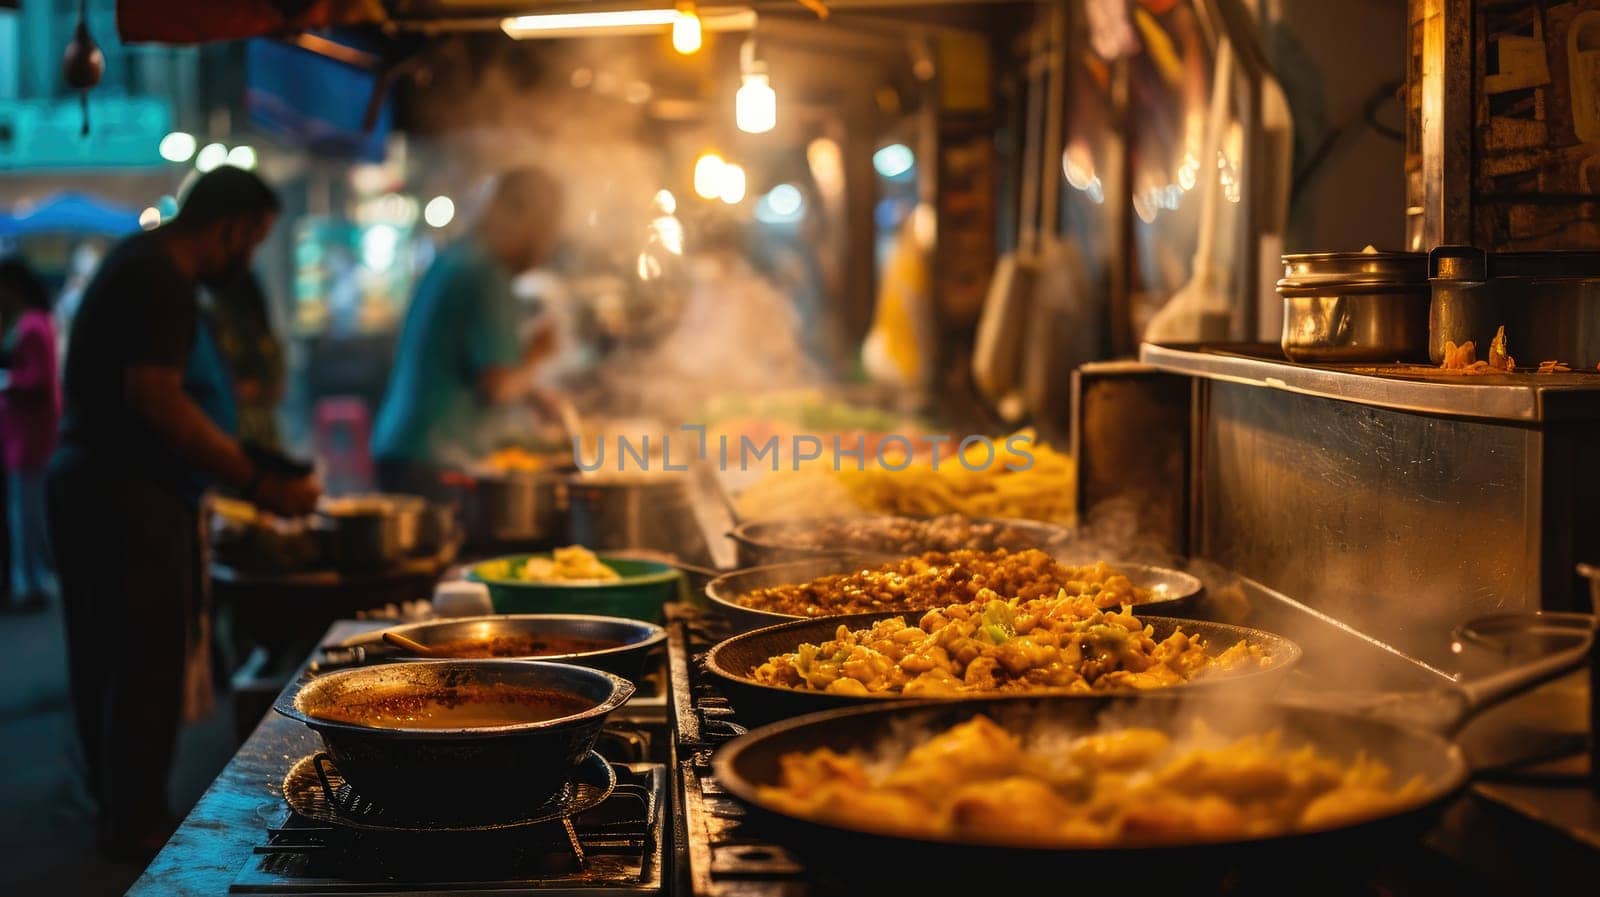 Thai street food is full of aromas and flavors by Yurich32